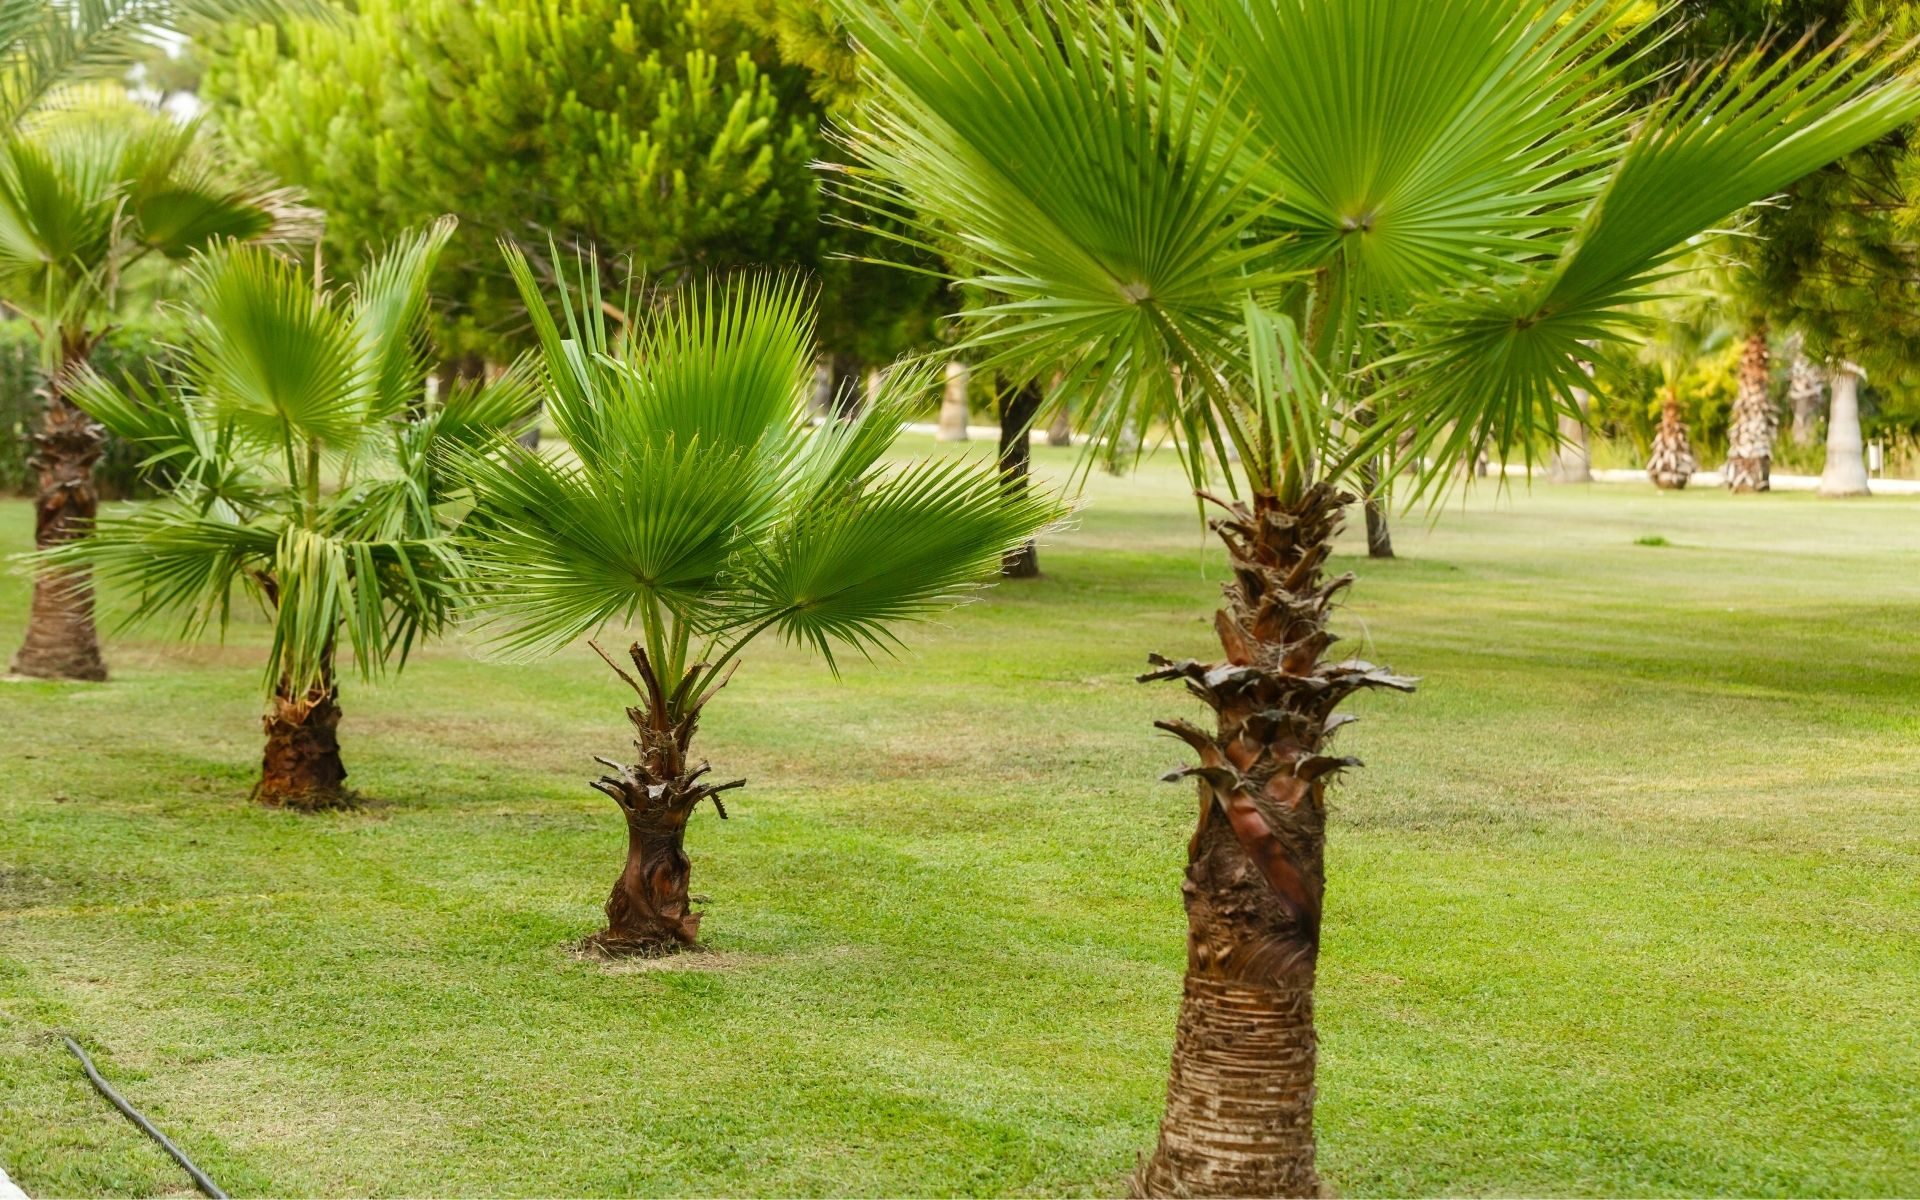 A row of young palms planted in a lawn.